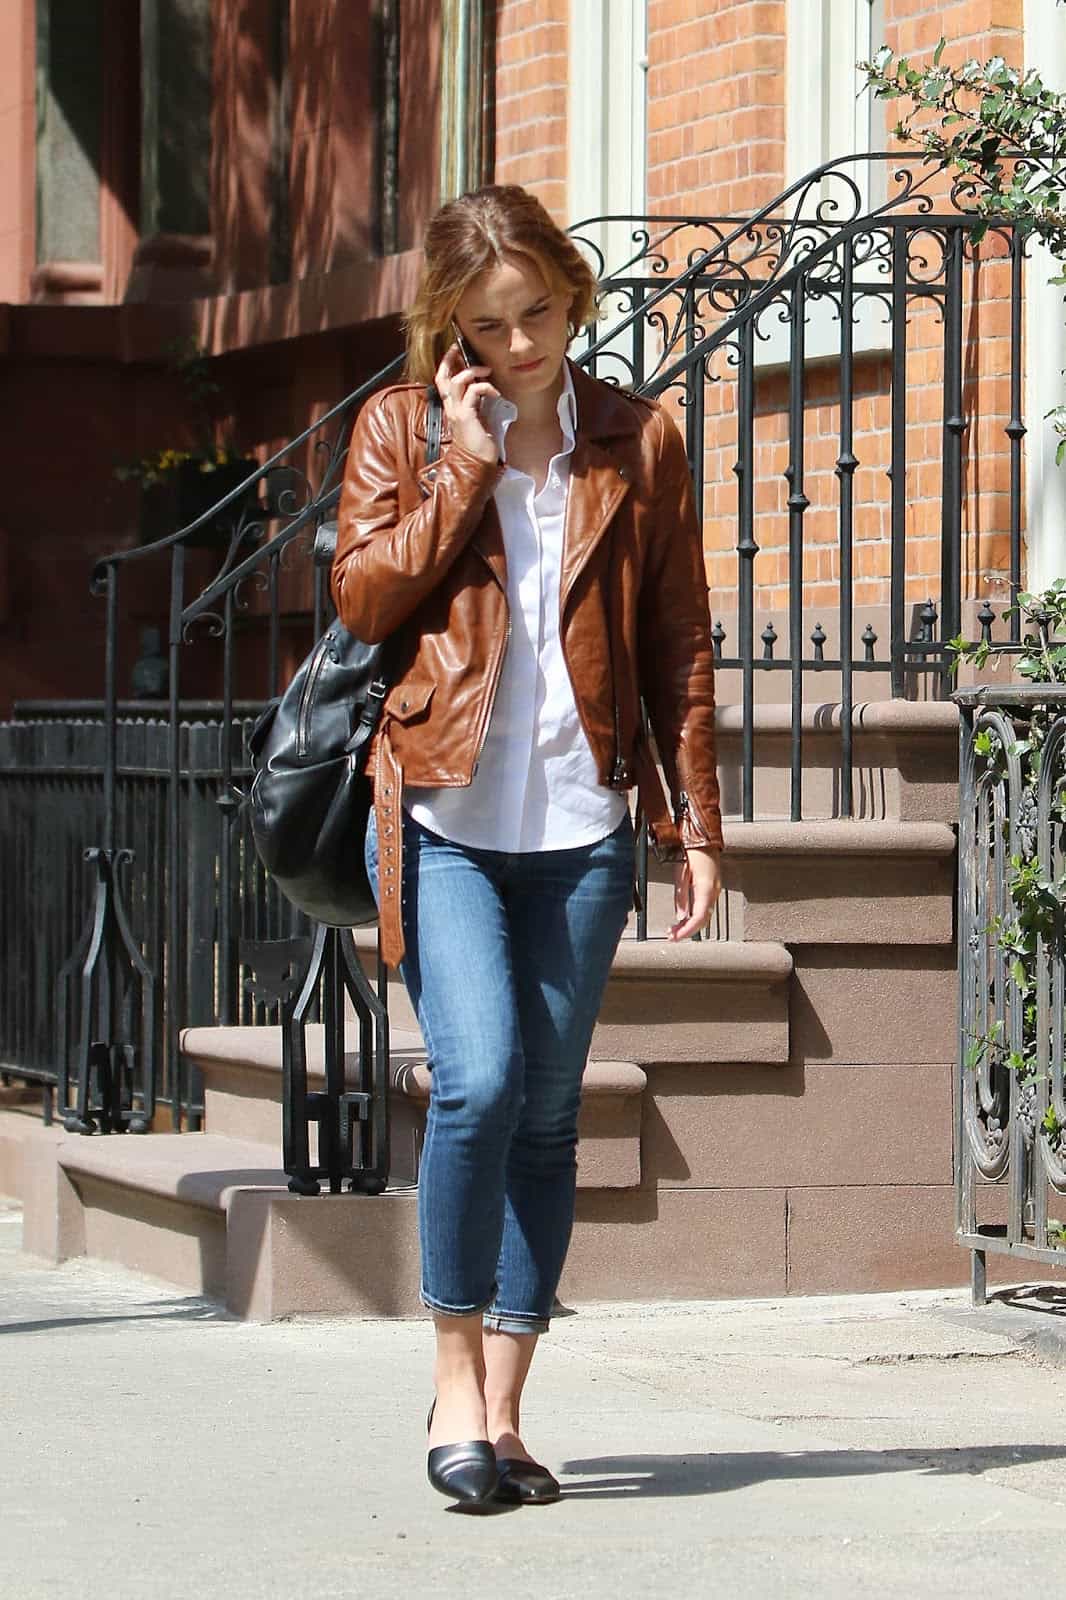 Emma Watson Was a Sensation in a Chic Leather Jacket and Skinny Jeans in NY